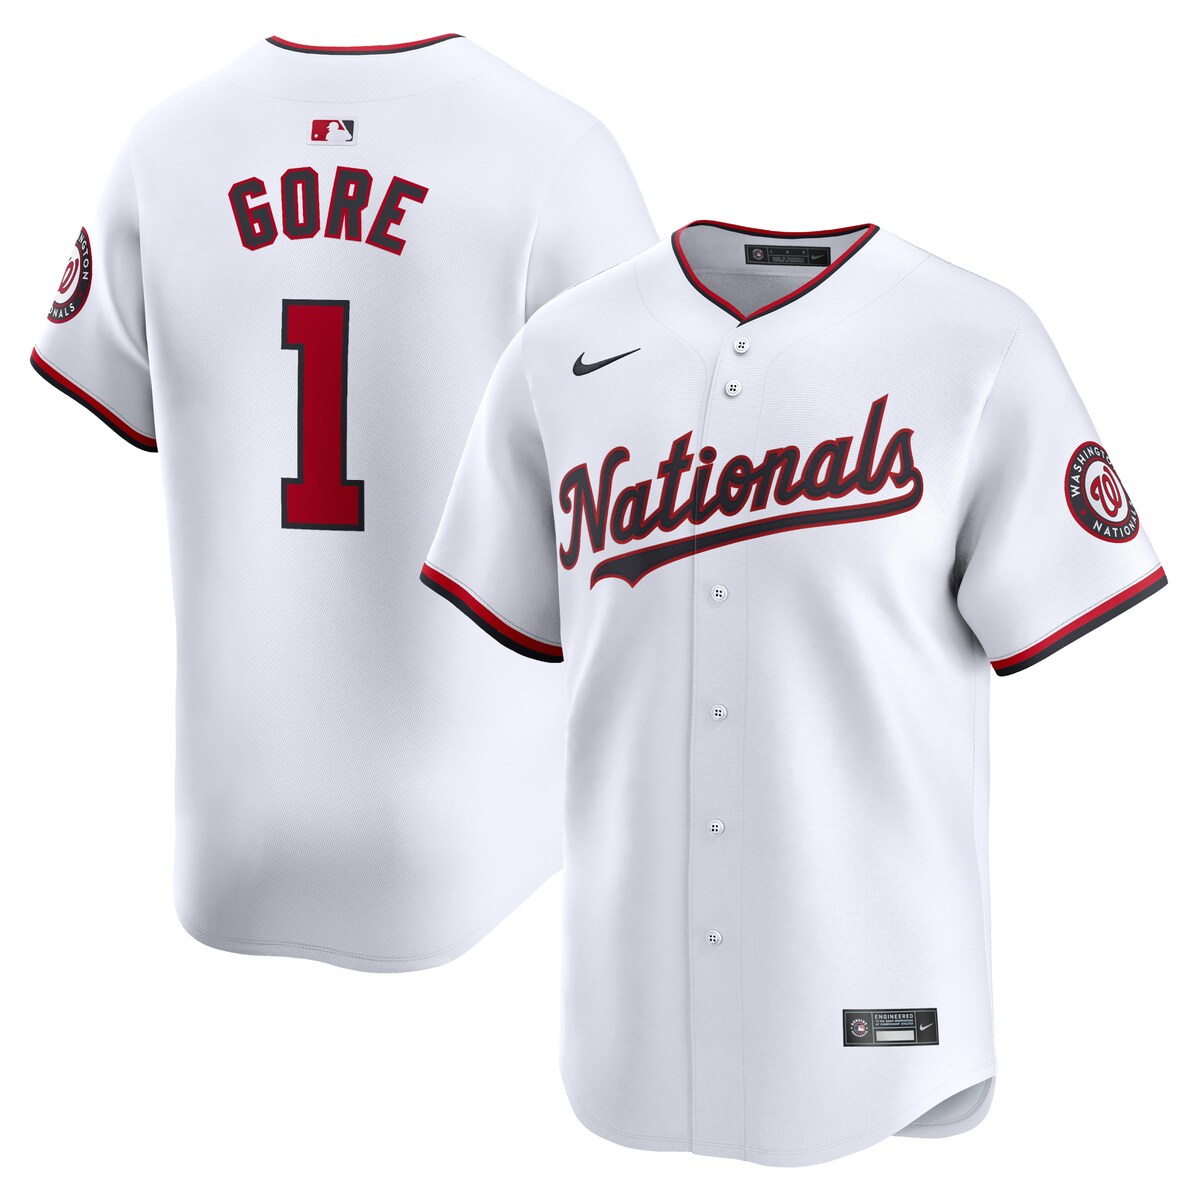 MLB iViY ~ebh jtH[ Nike iCL Y zCg (Nike Men's Limited Jerseys - FTF All Player MASTER Style)